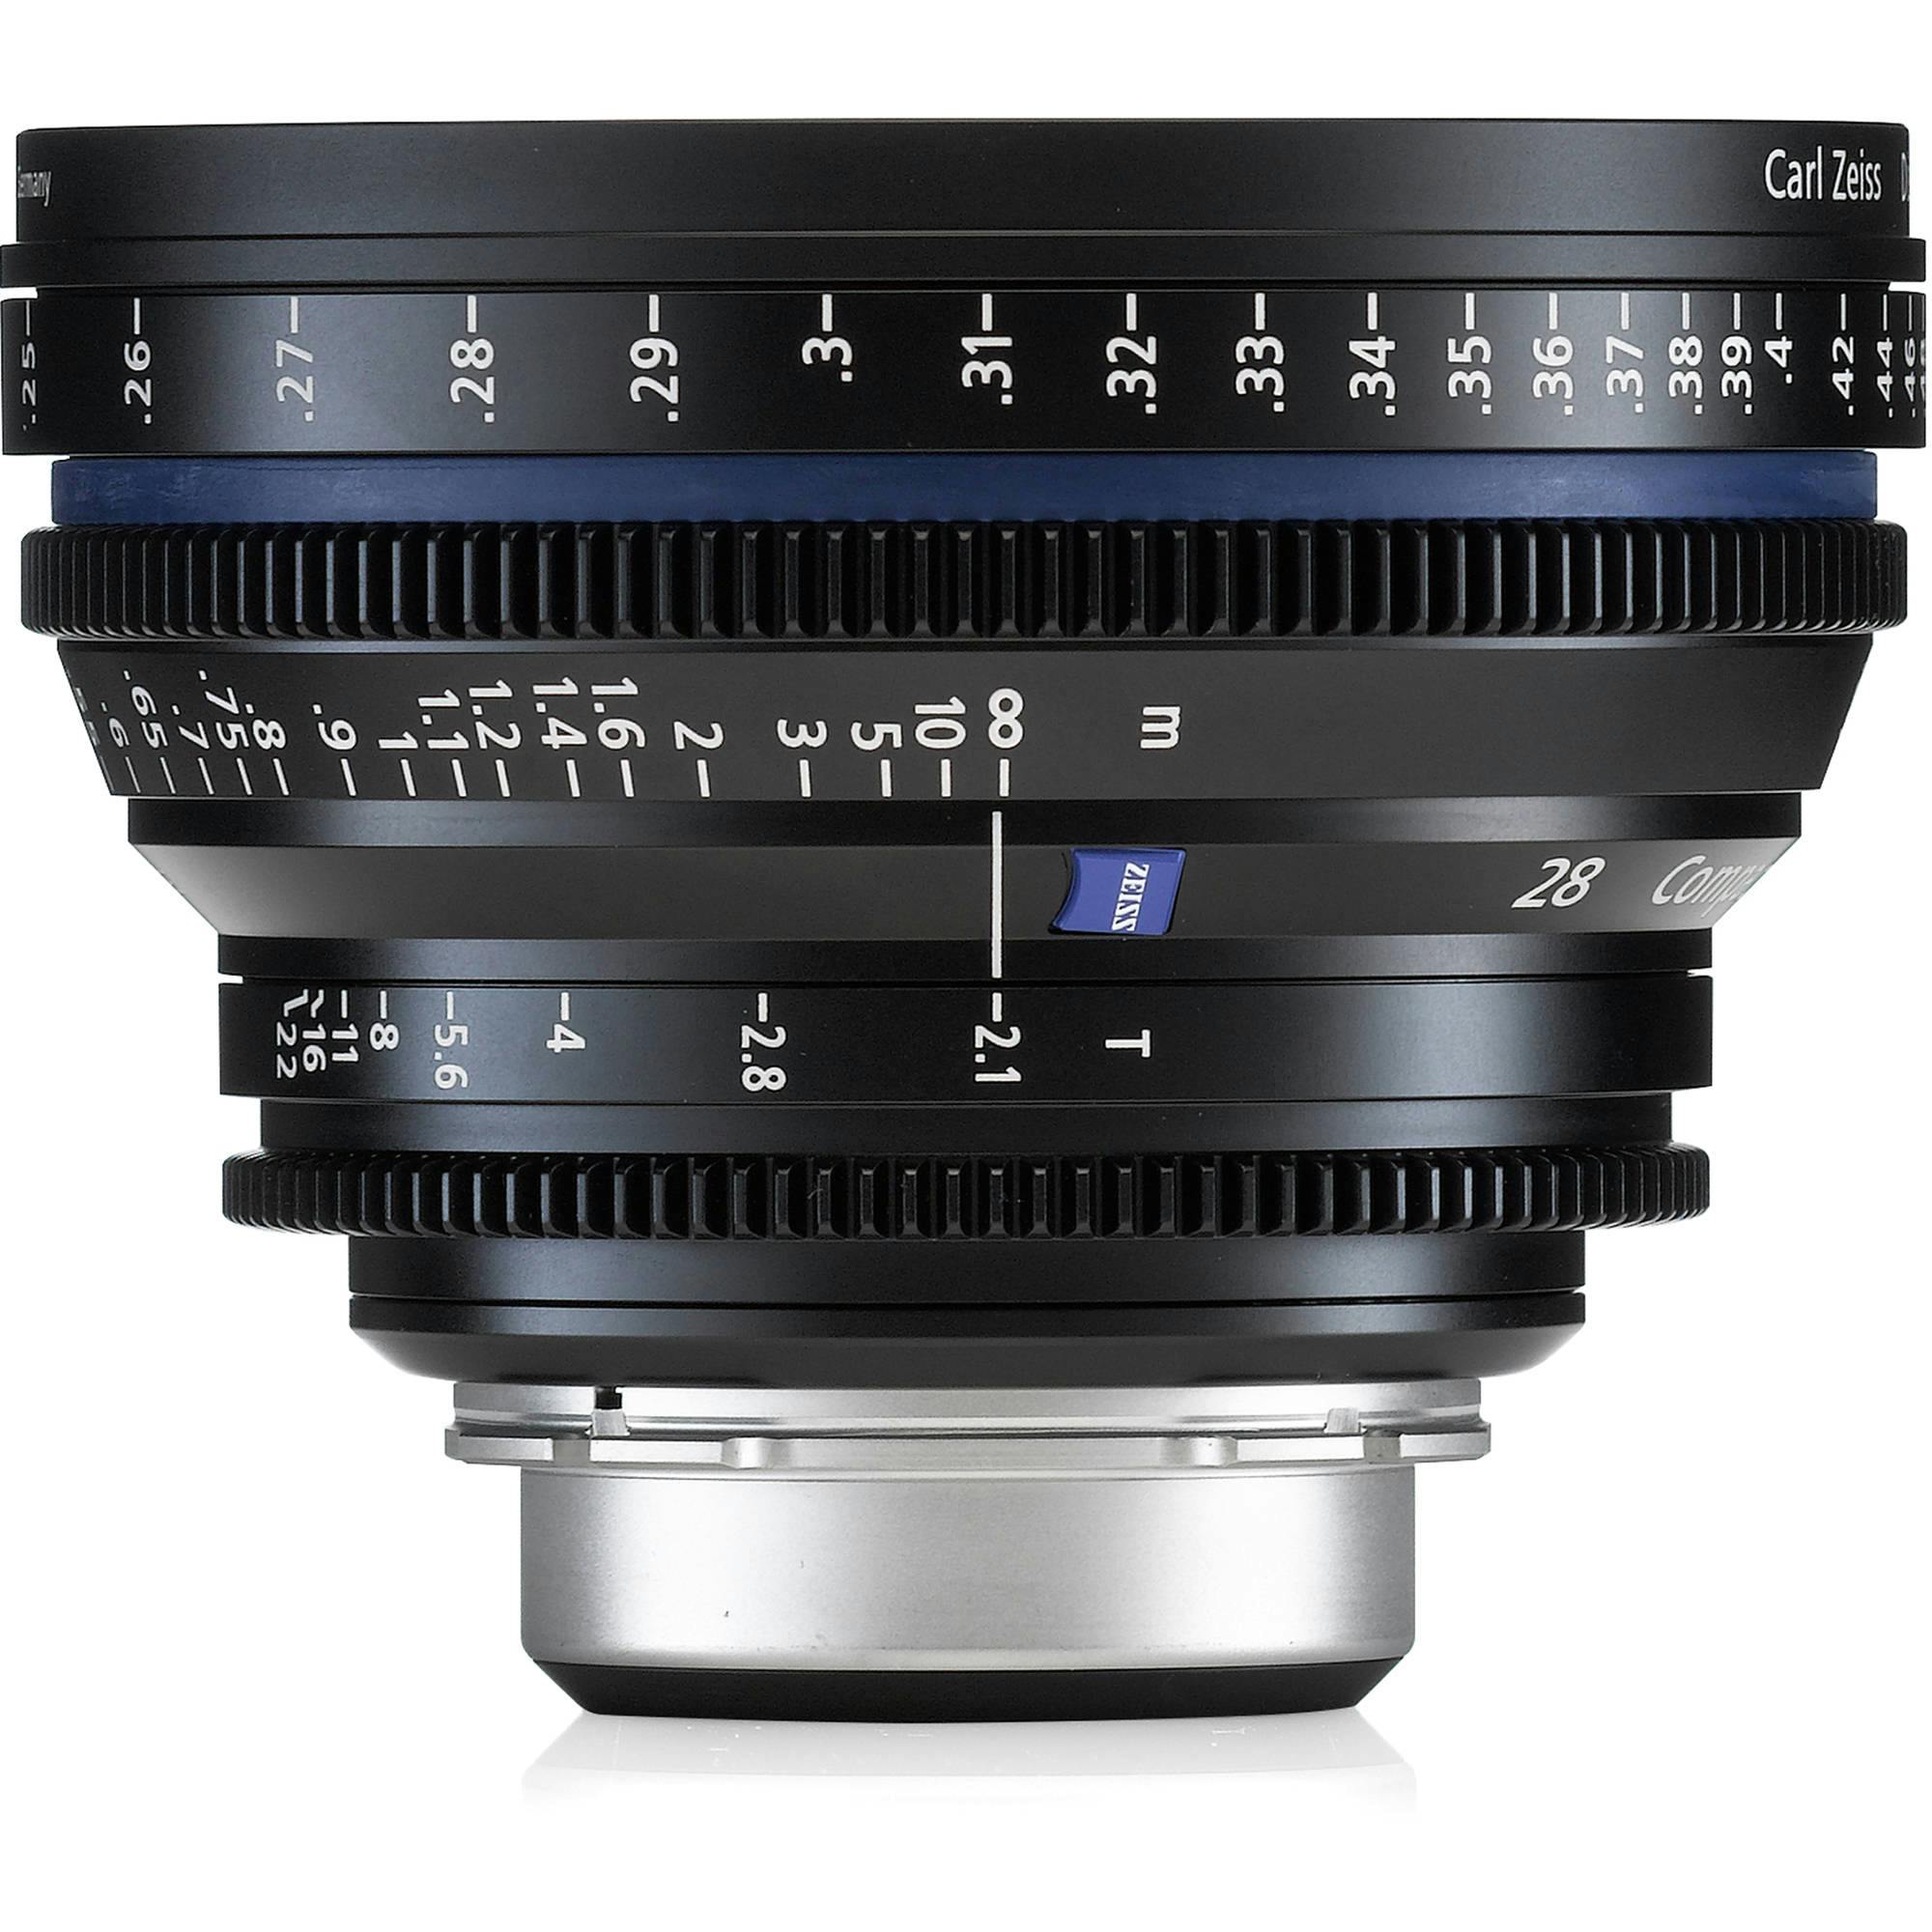 Zeiss Compact Prime CP.2 28mm T2.1